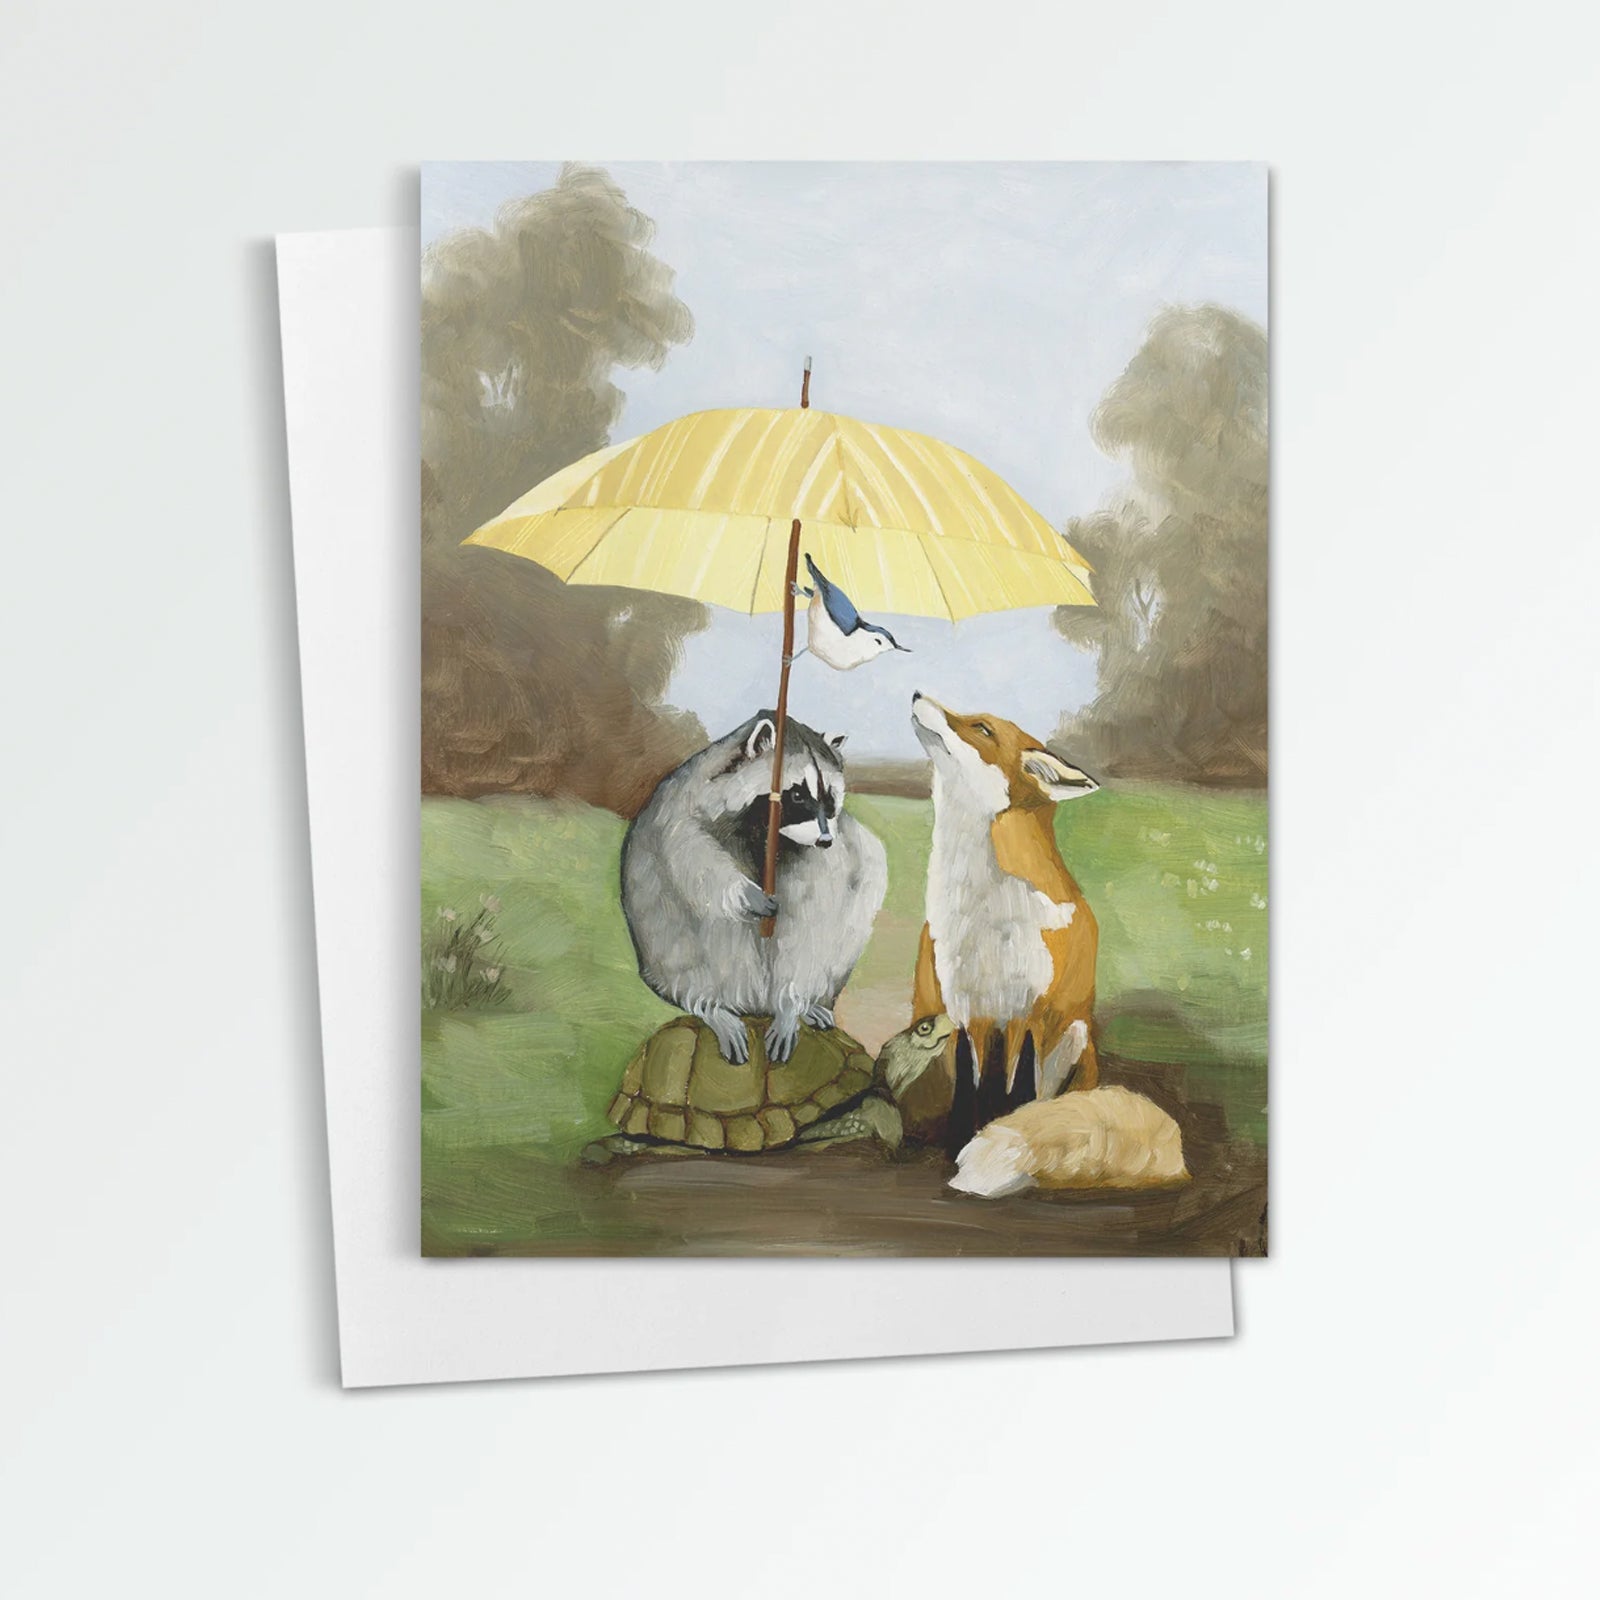 April Showers notecard from Kim Ferreira. A turtle, raccoon, fox and bird shelter underneath a yellow umbrella.